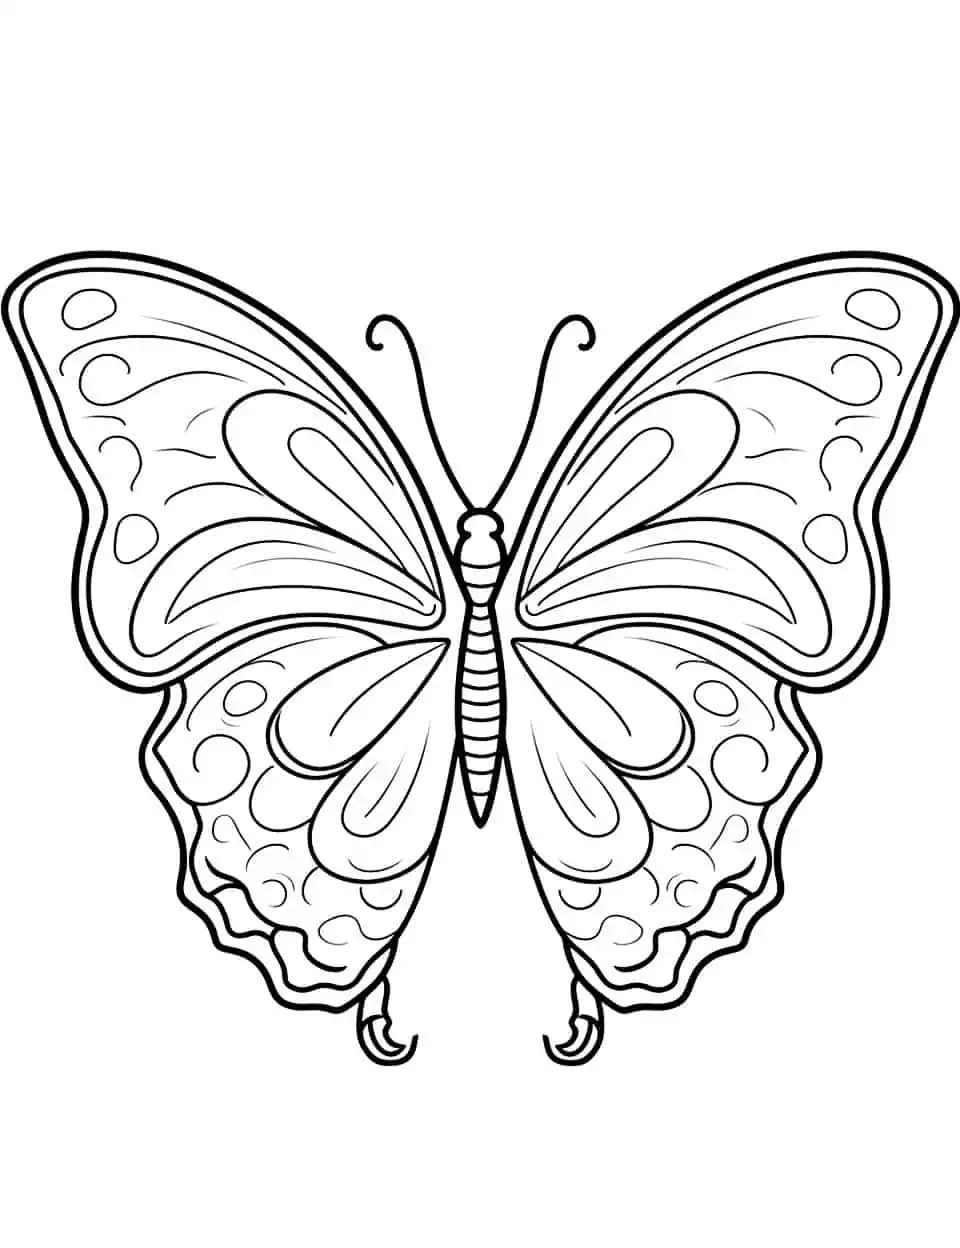 Swallowtail Serenity Butterfly Coloring Page - A realistic coloring page showcasing the exquisite beauty of a swallowtail butterfly.